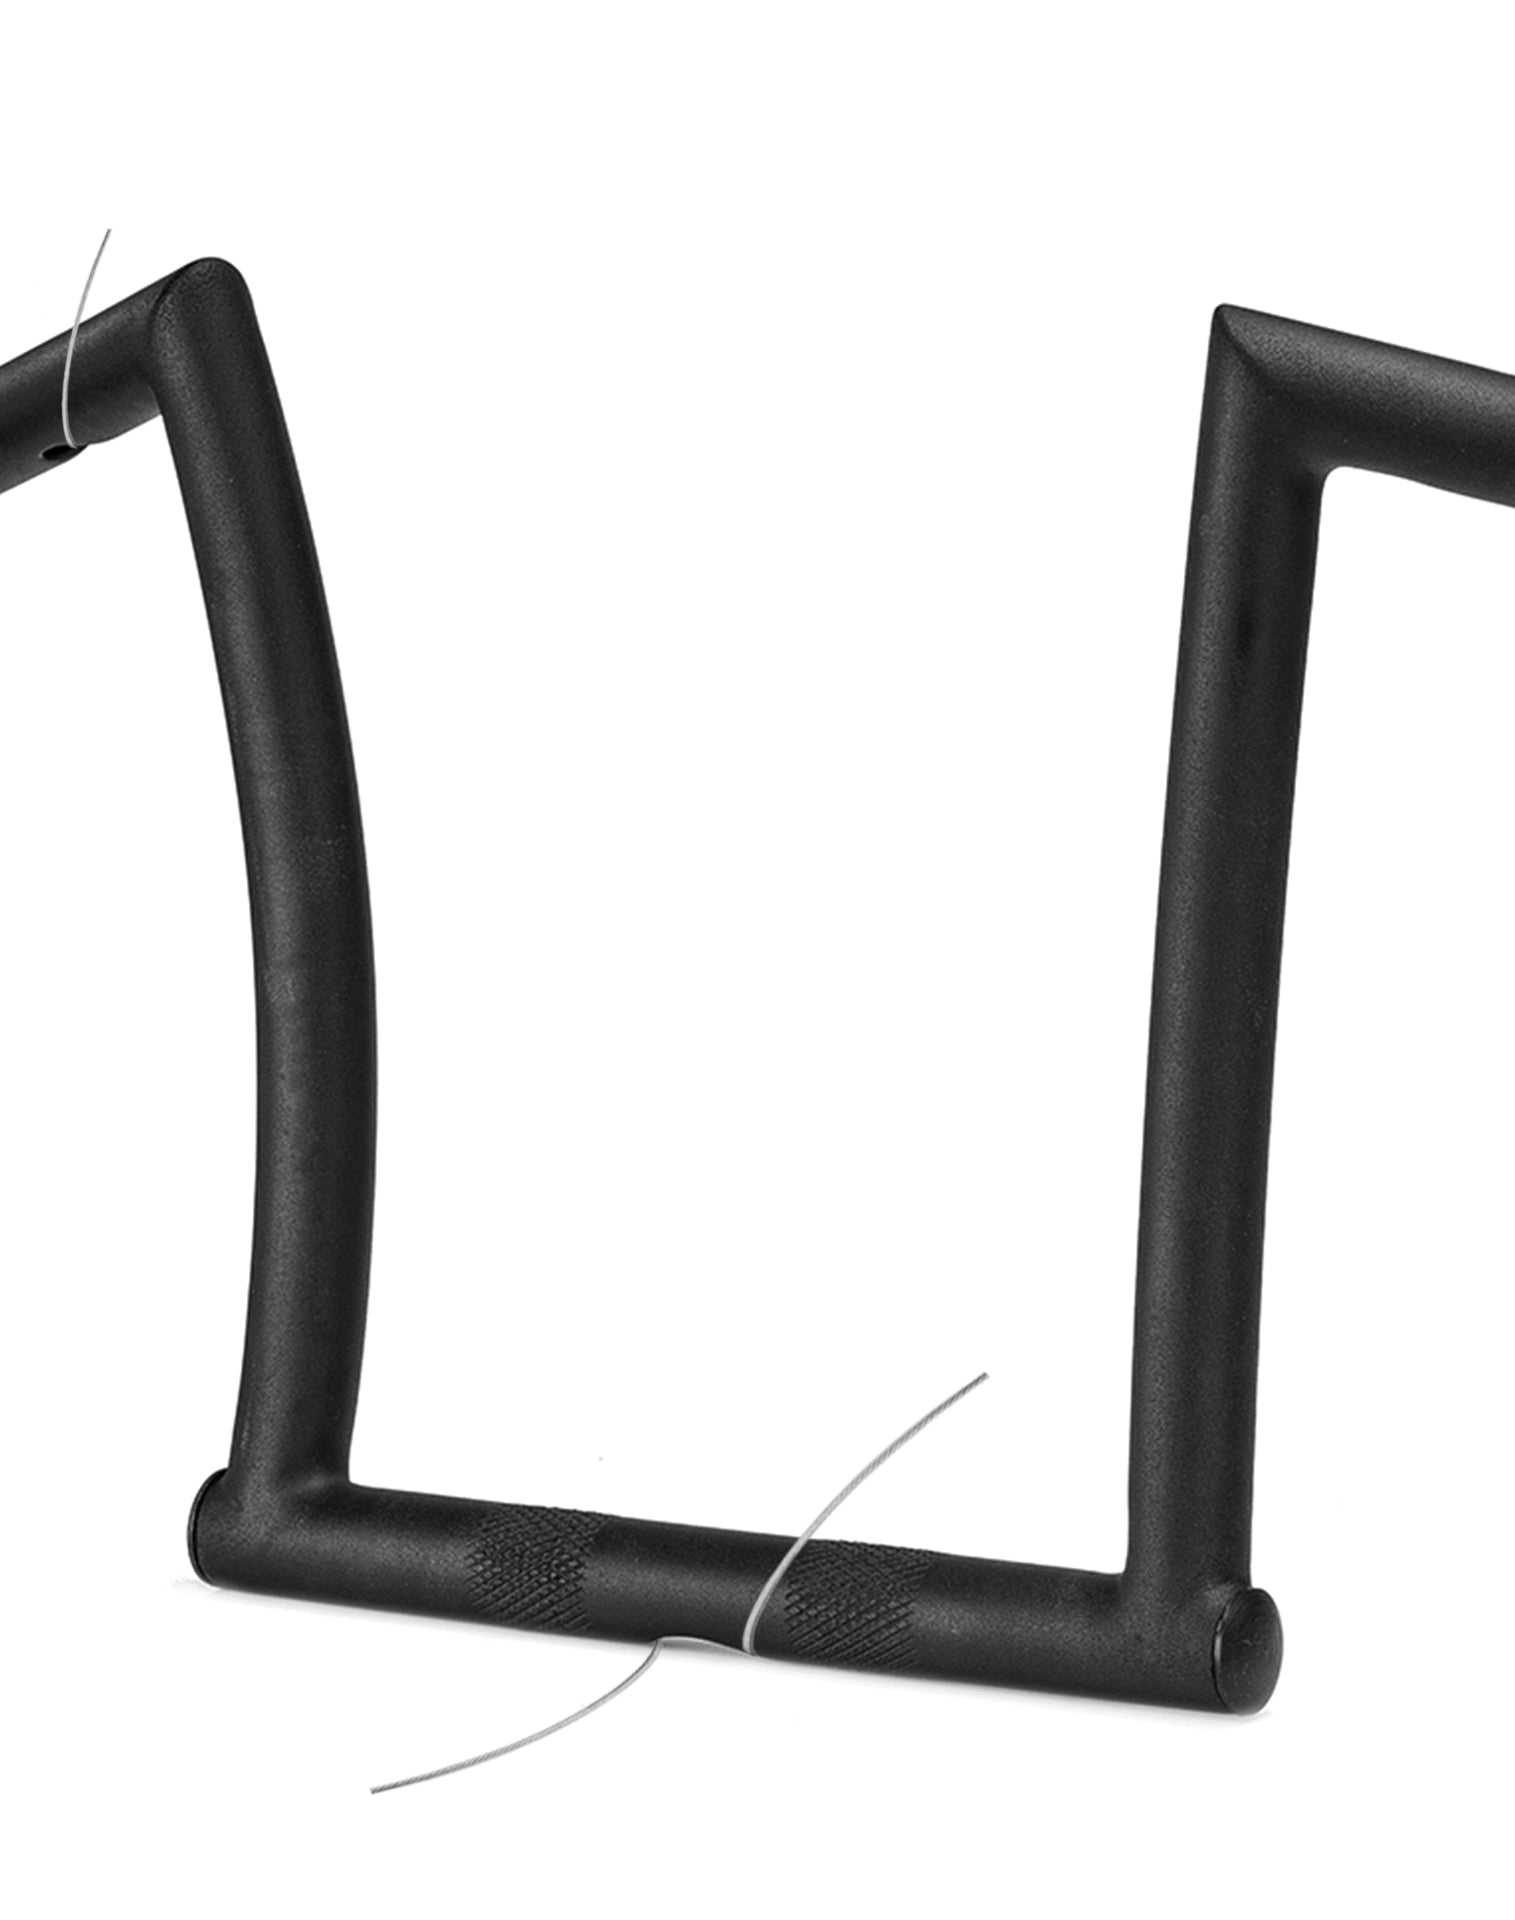 Viking Iron Born 9" Handlebar for Harley Sportster 1200 Low XL1200L Matte Black Close up View